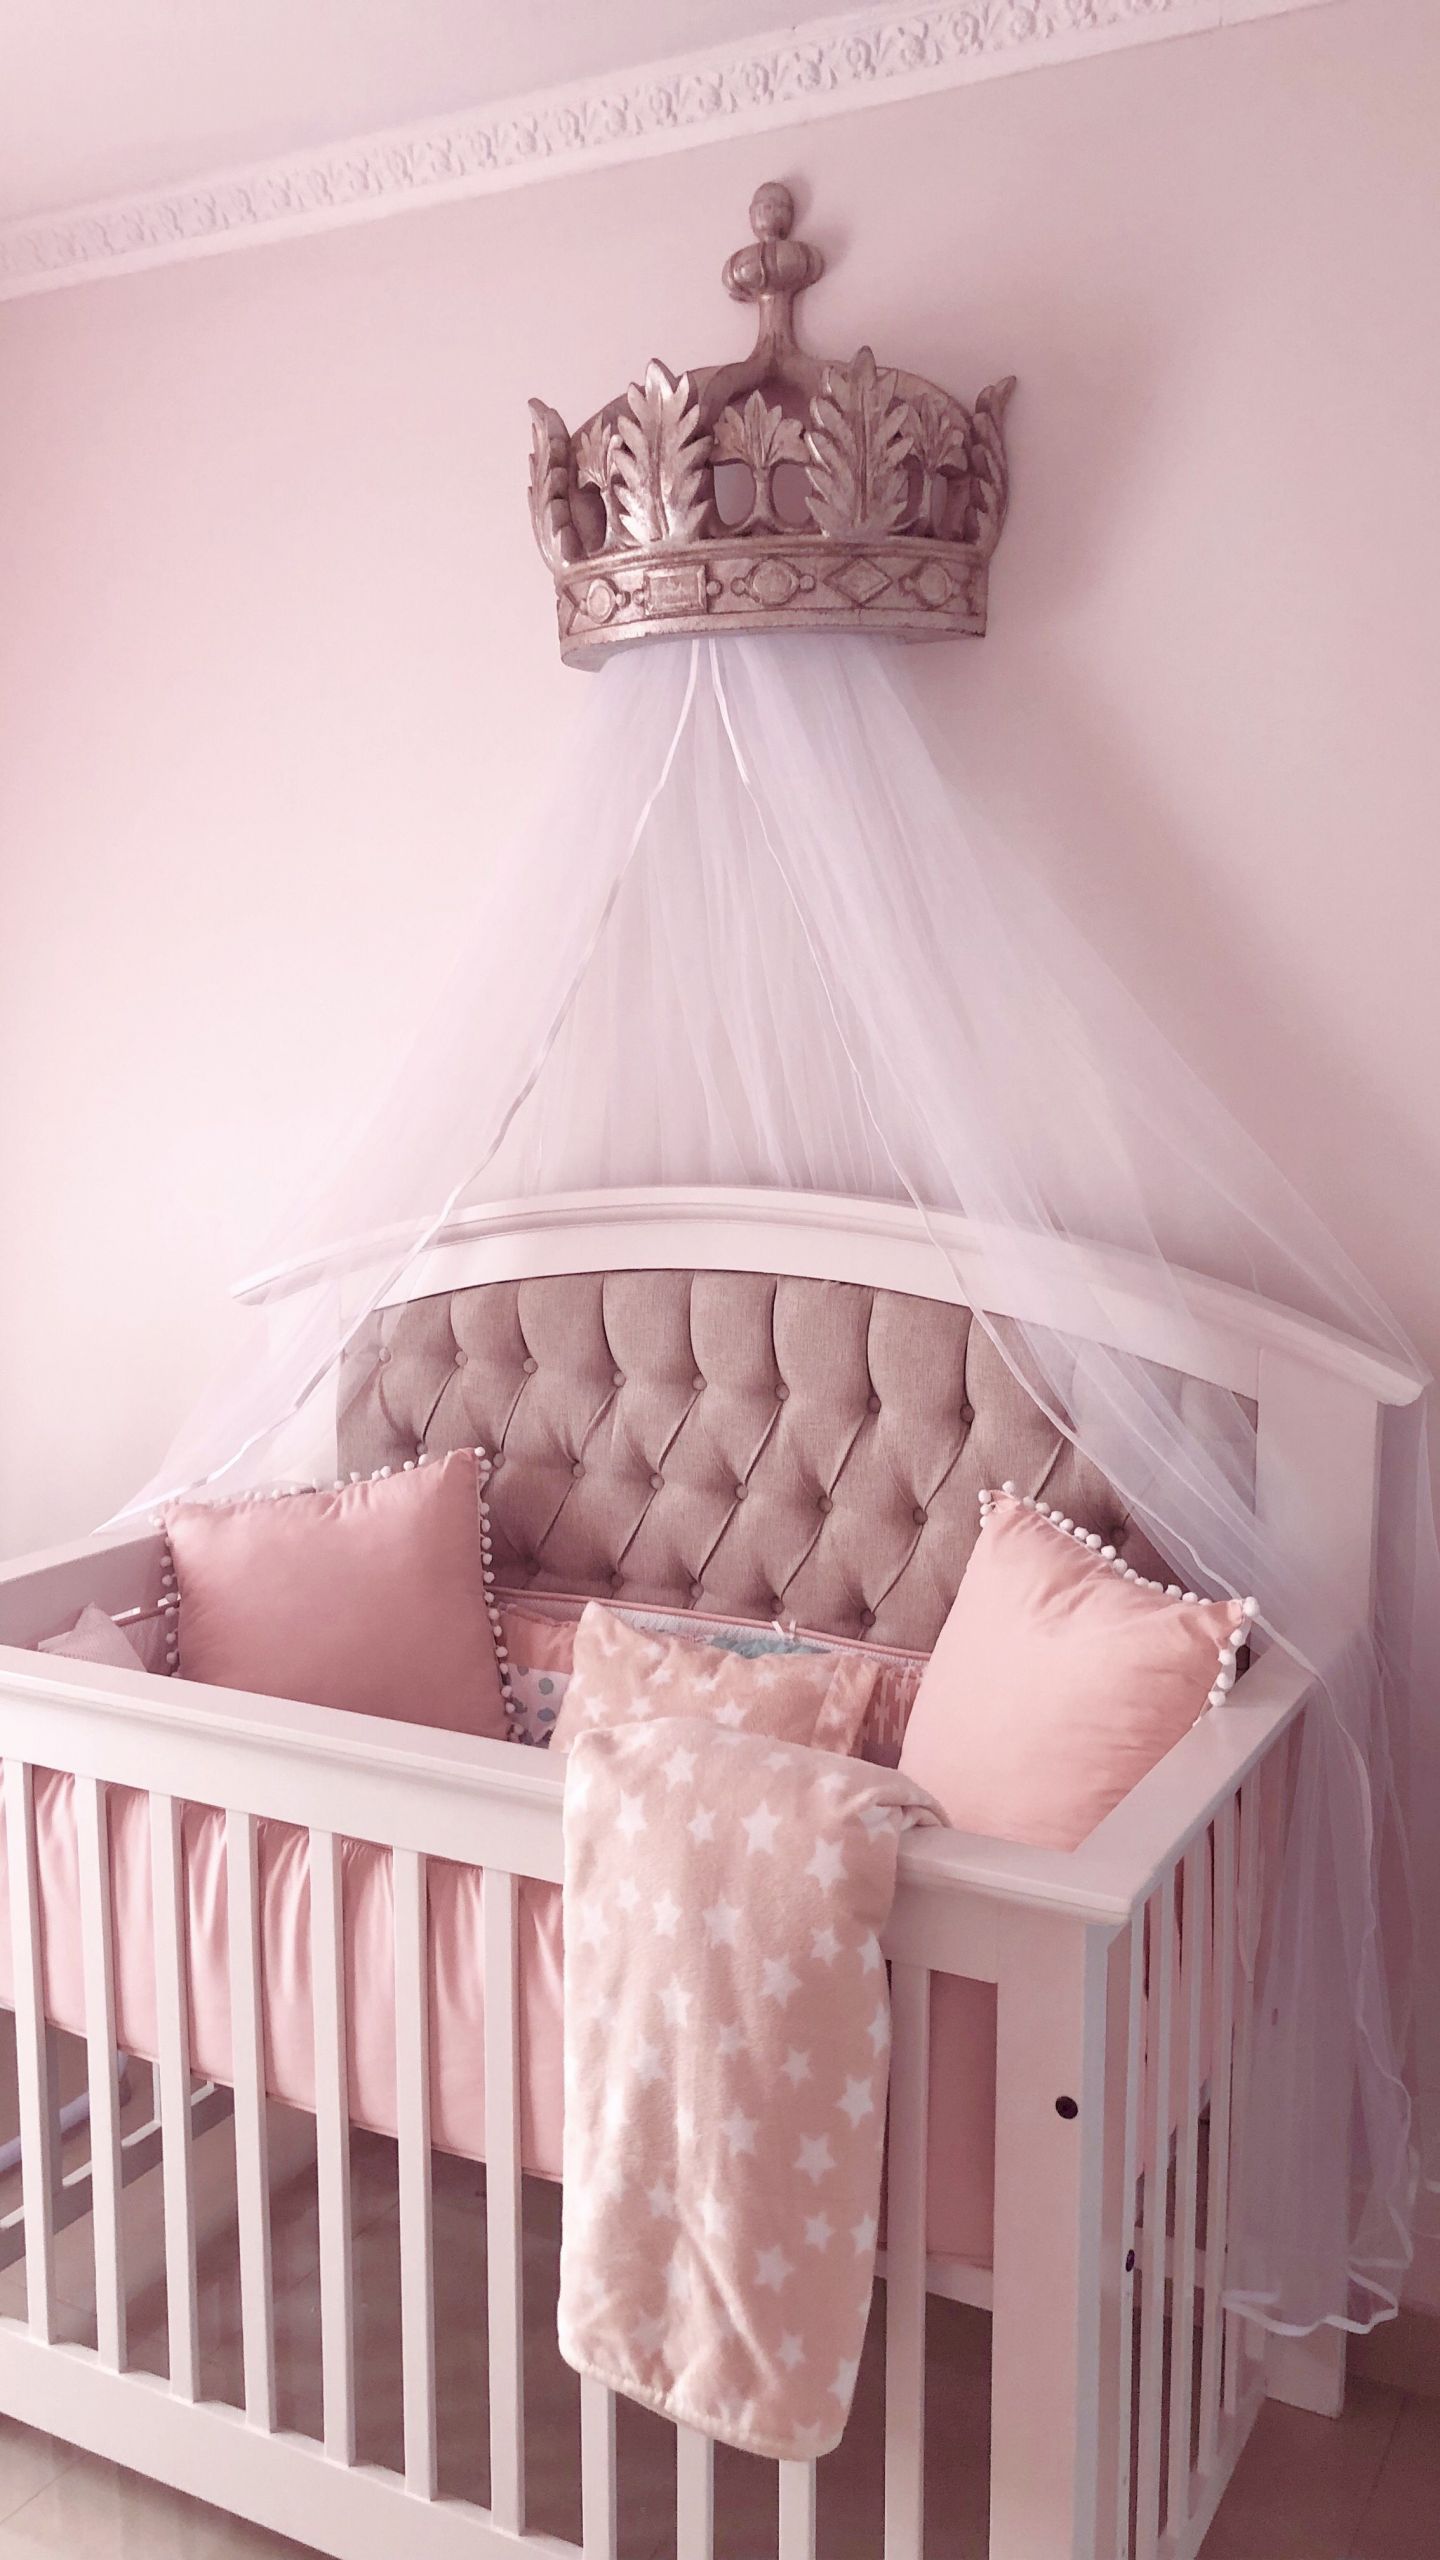 Crown Decor For Baby Room
 Princess nursery crown canopy NRS ️